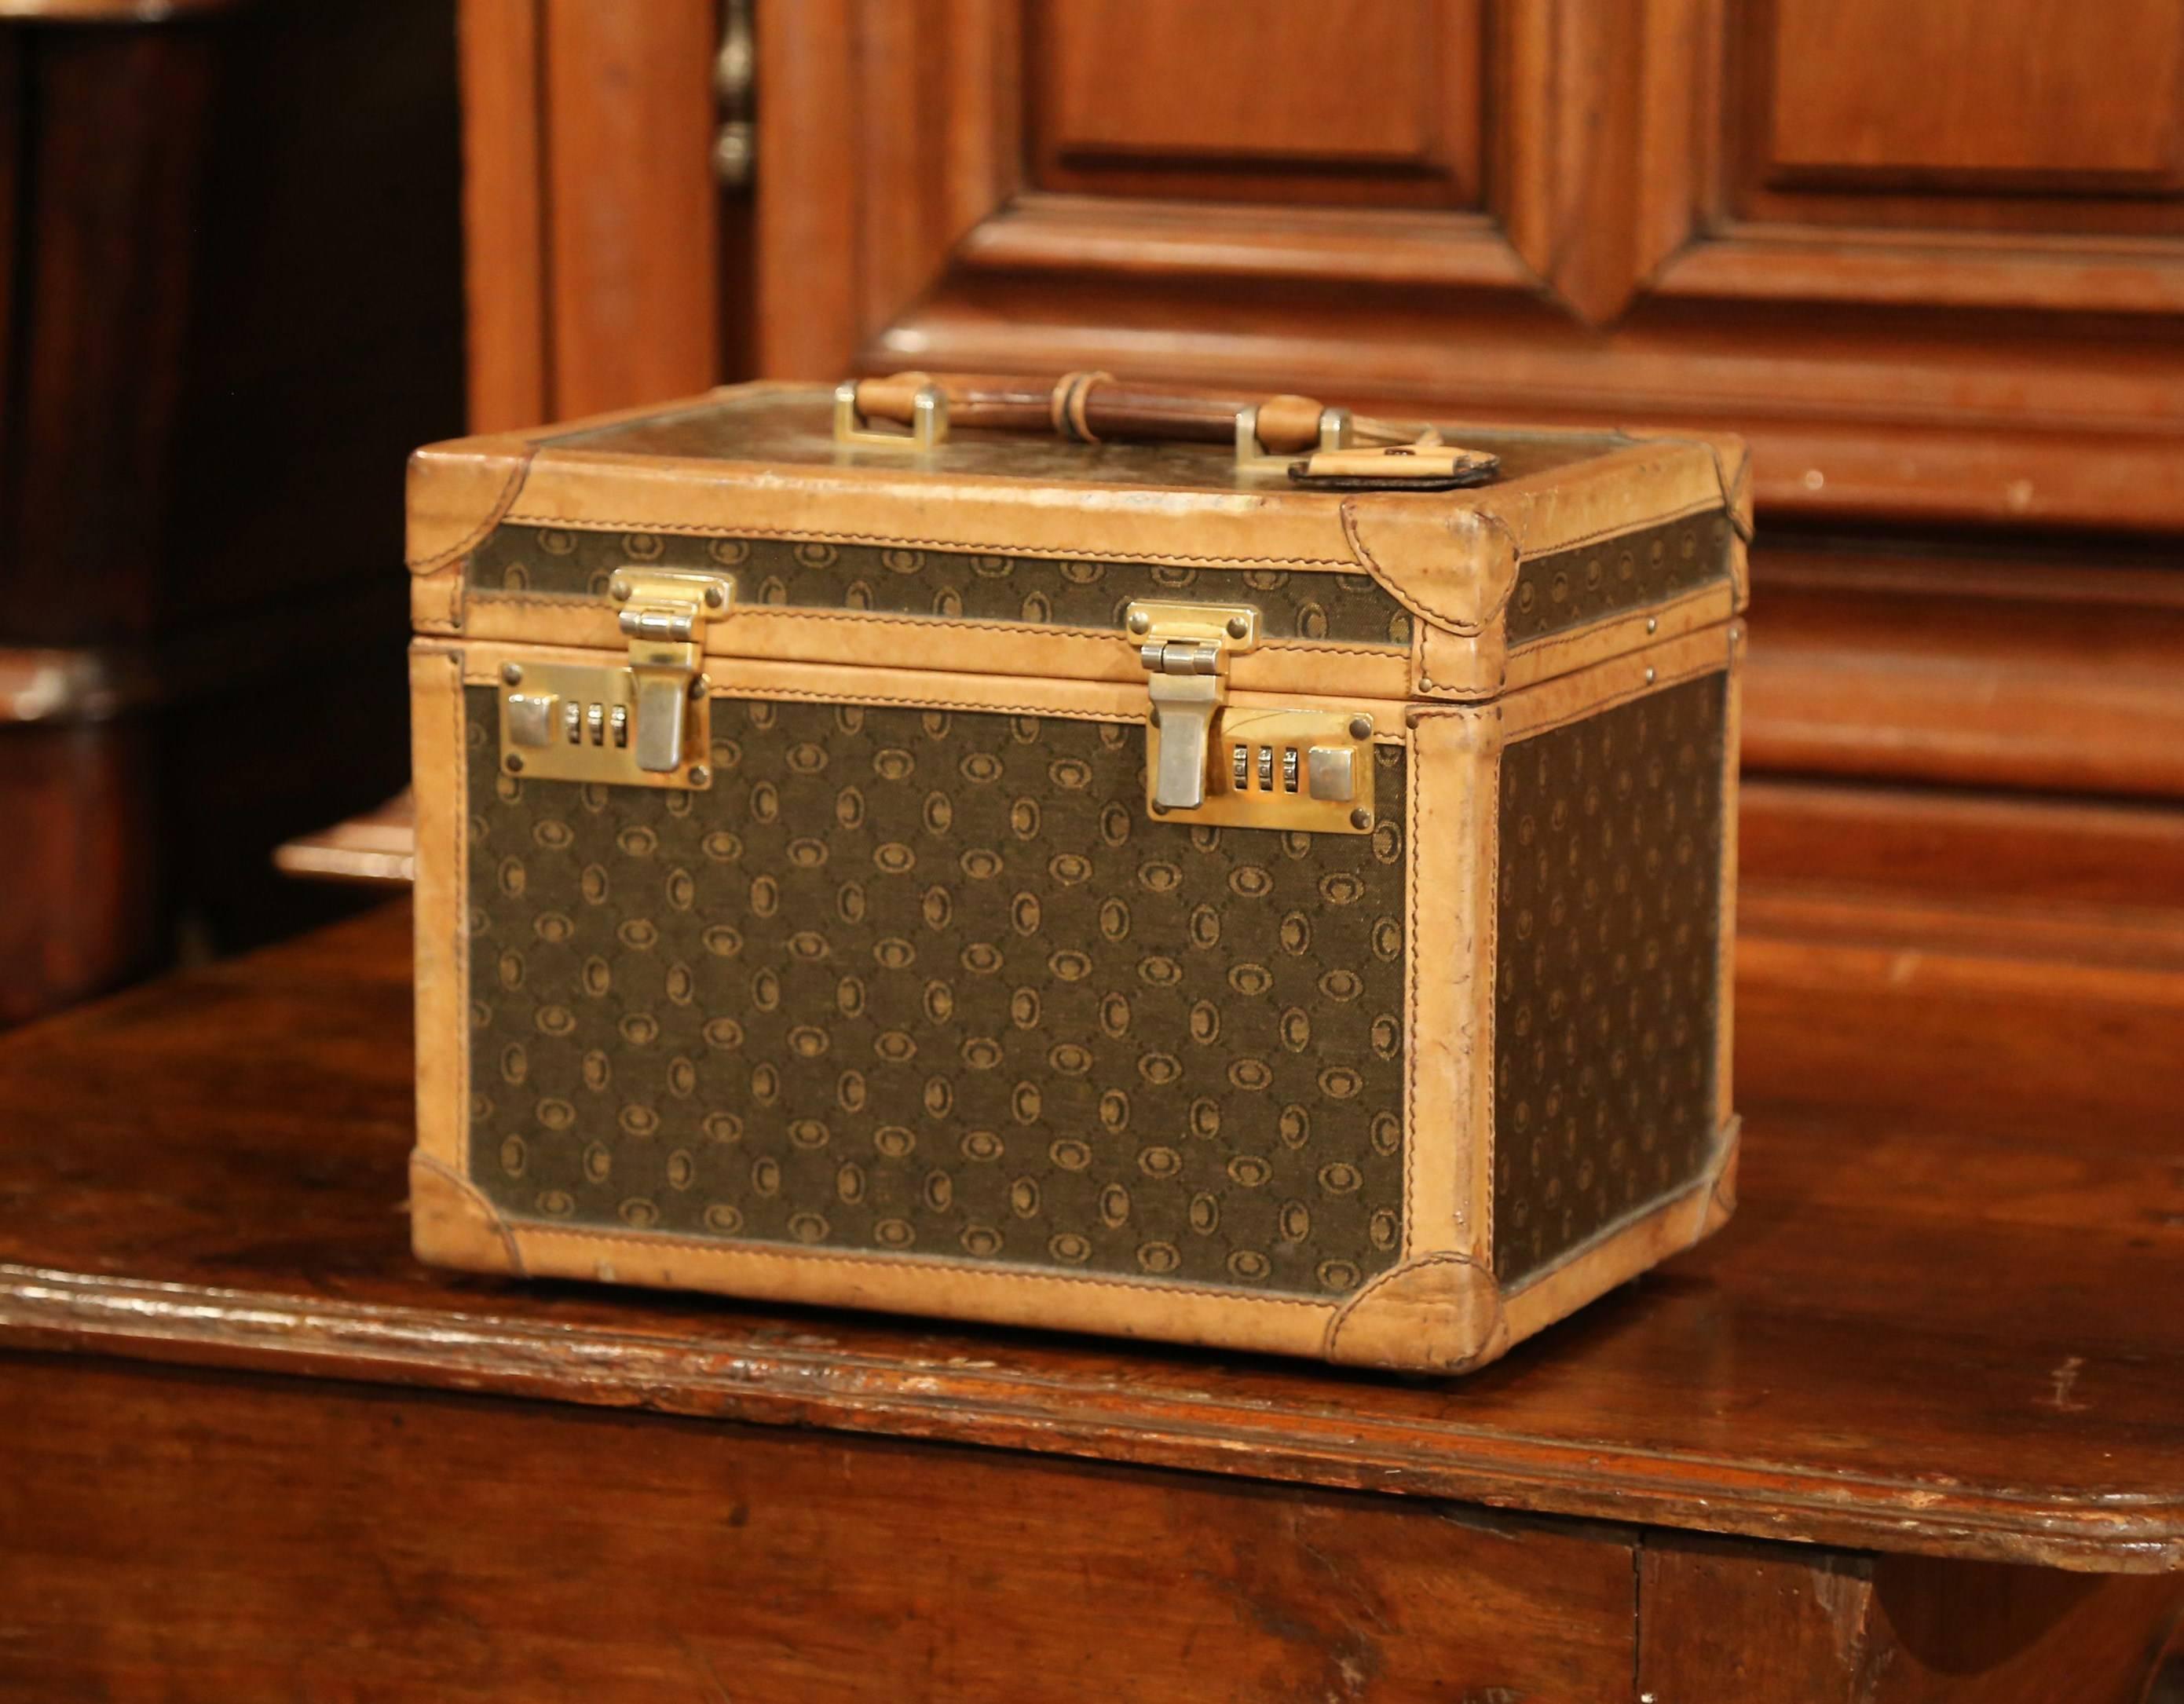 Stow your toiletry and other treasures inside this elegant, antique traveling box. Crafted in France, circa 1880, this decorative trunk is covered with leather panels embellished by painted accent decor, leather trim and studded with brass hardware.